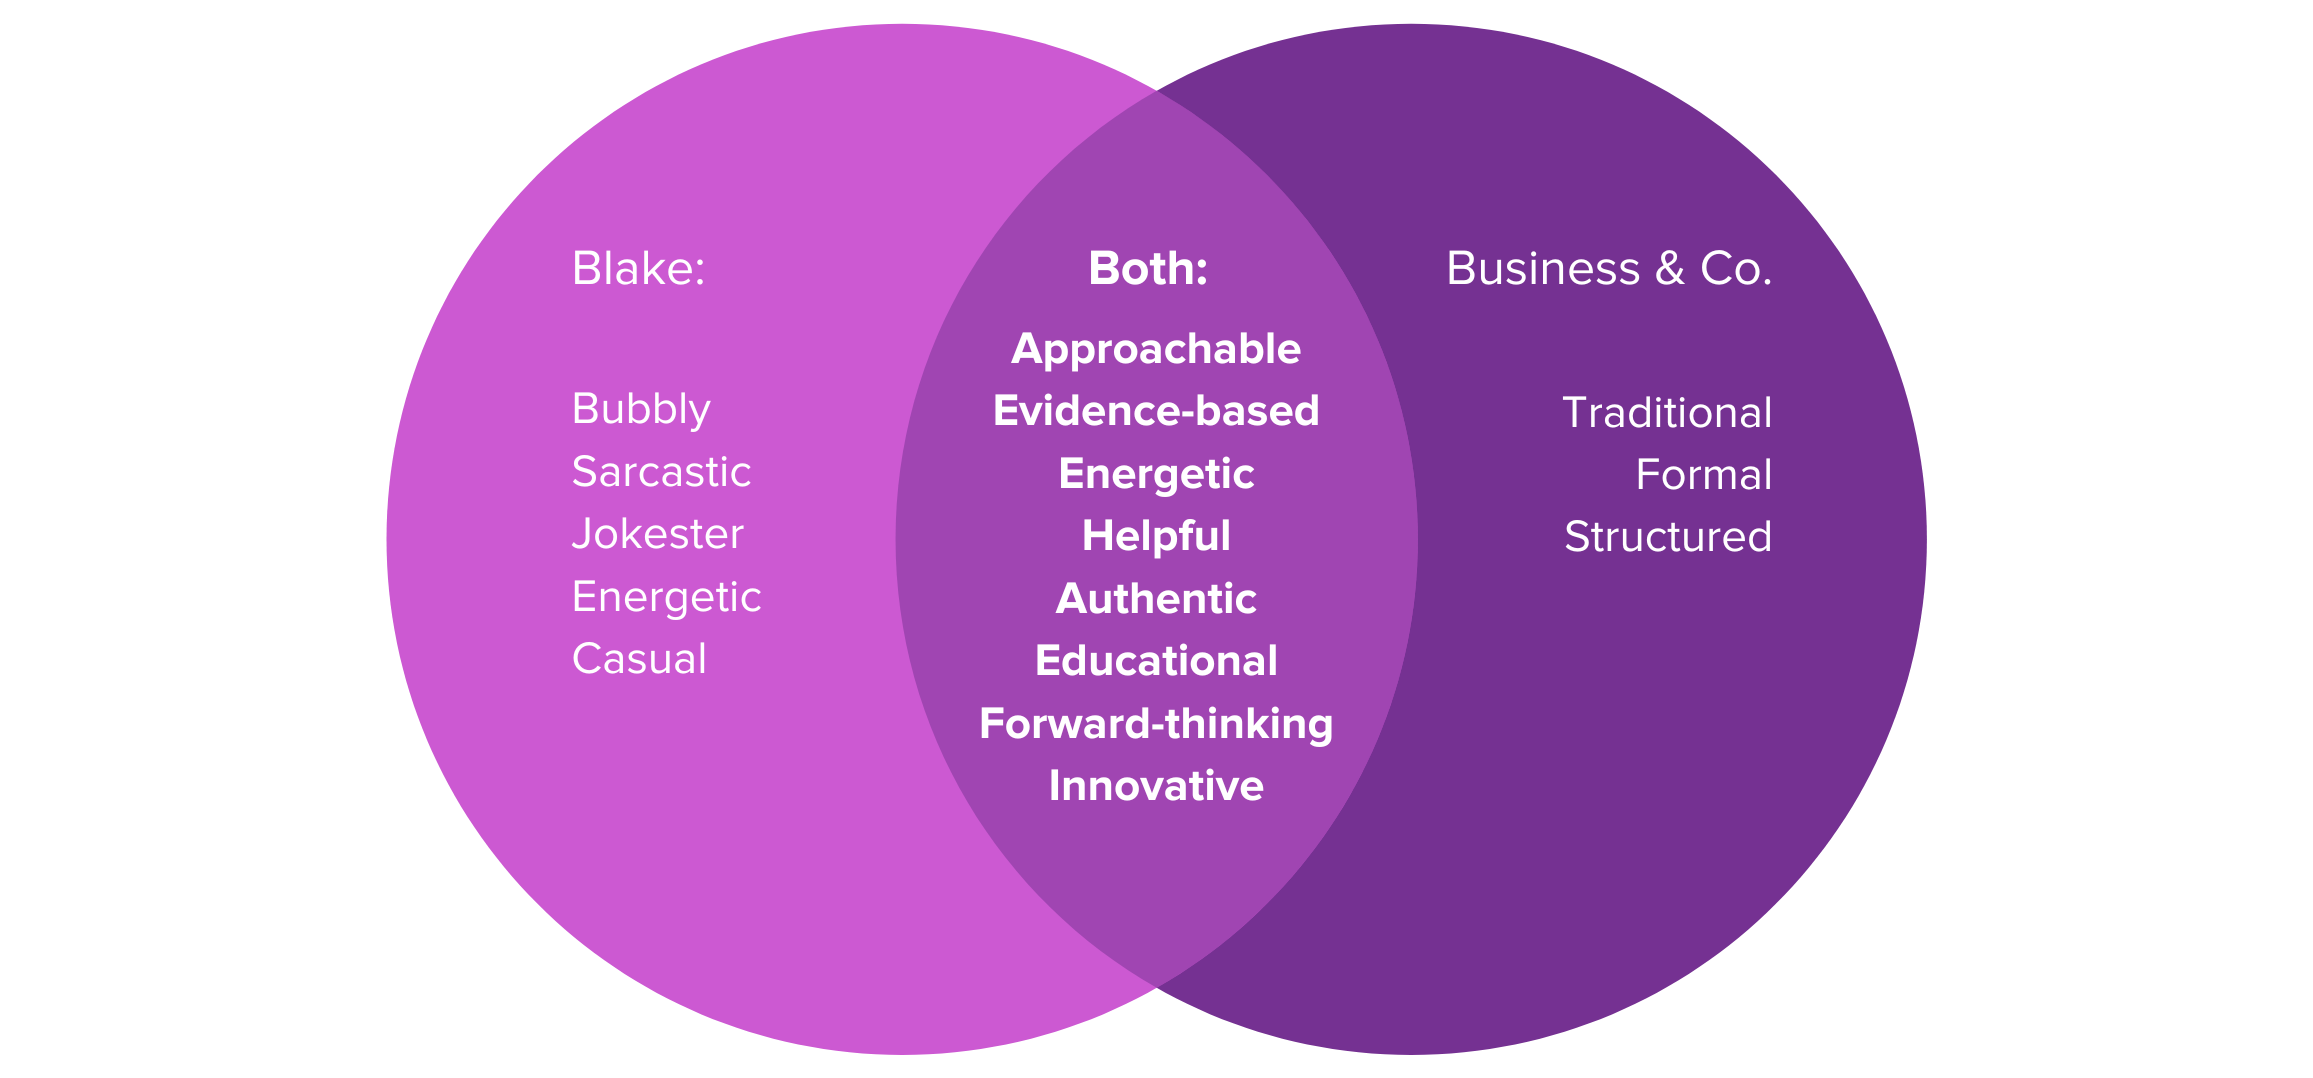 A venn diagram showing the similarities and differences between Blake's writing style and Business Co's writing style.